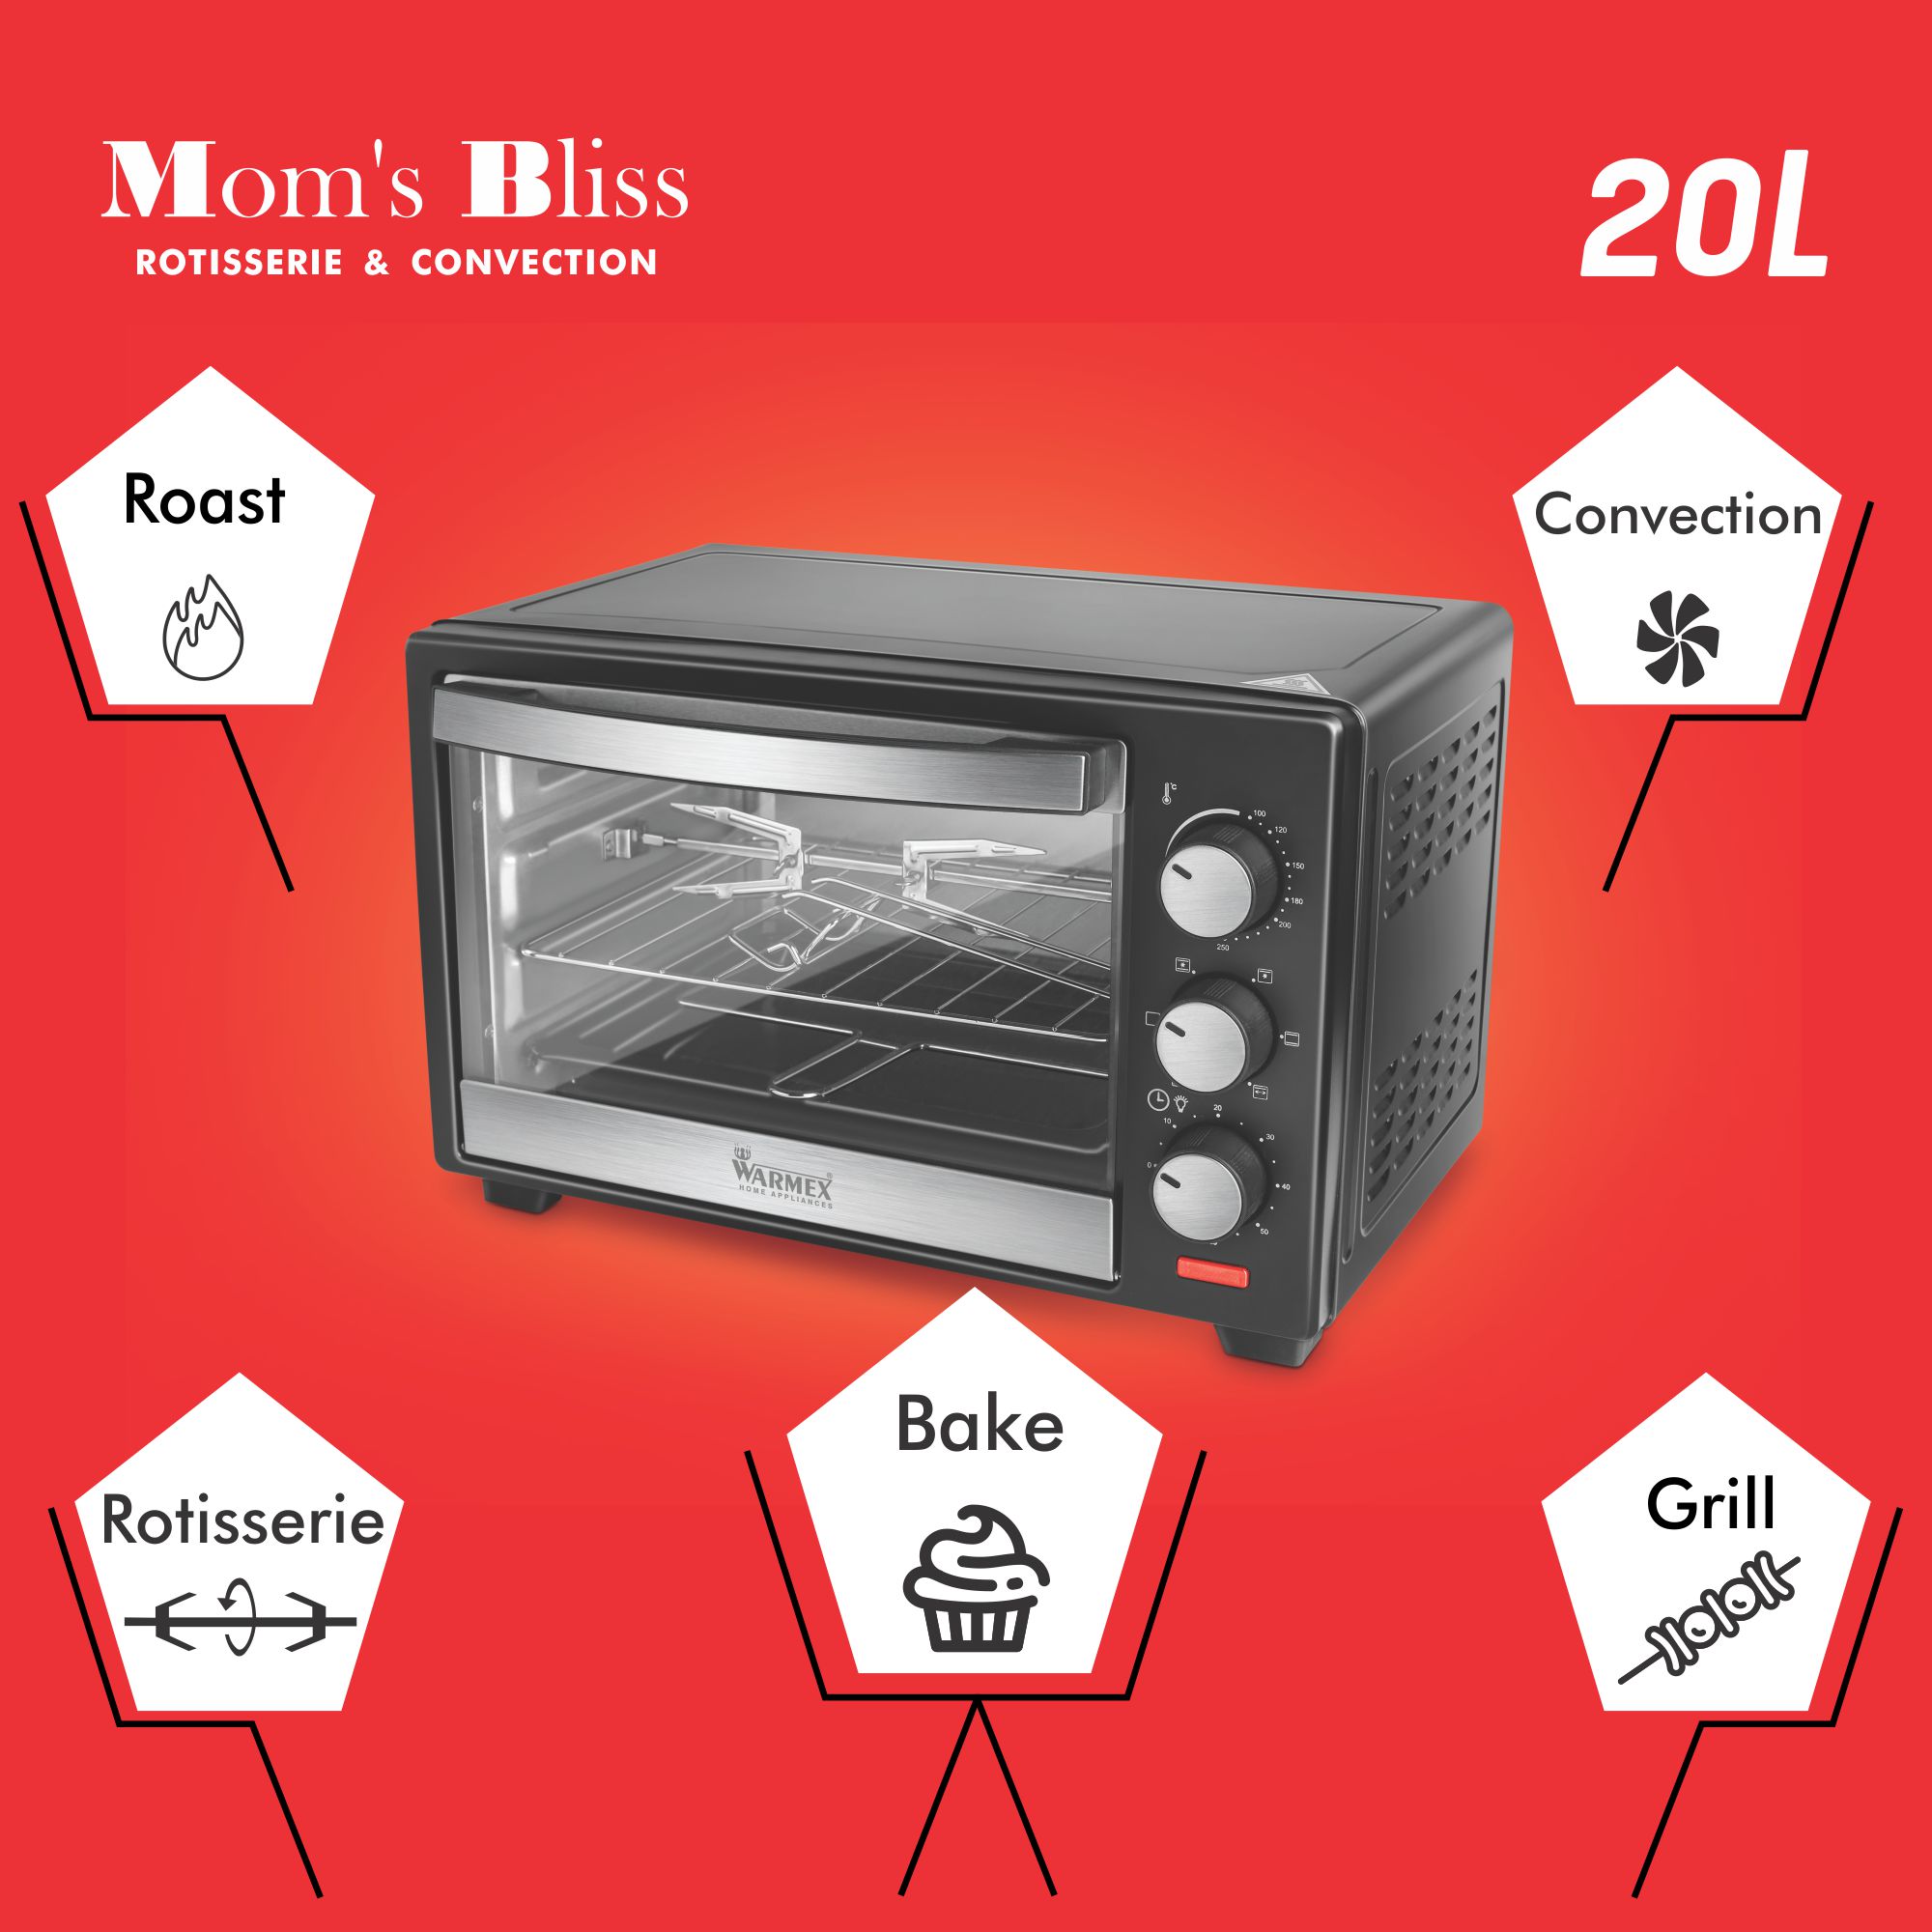 Warmex Oven Toaster Griller, Bake, Broil, Toast, Convection, Rotisserie, Keep Warm, Glass Door Window, Variable Heating Mode & 60 Minutes Timer With Auto Shut Off and Ready Bell with 20 Liter Capacity – MB20L/R&C (Black, 1280 Watts)…